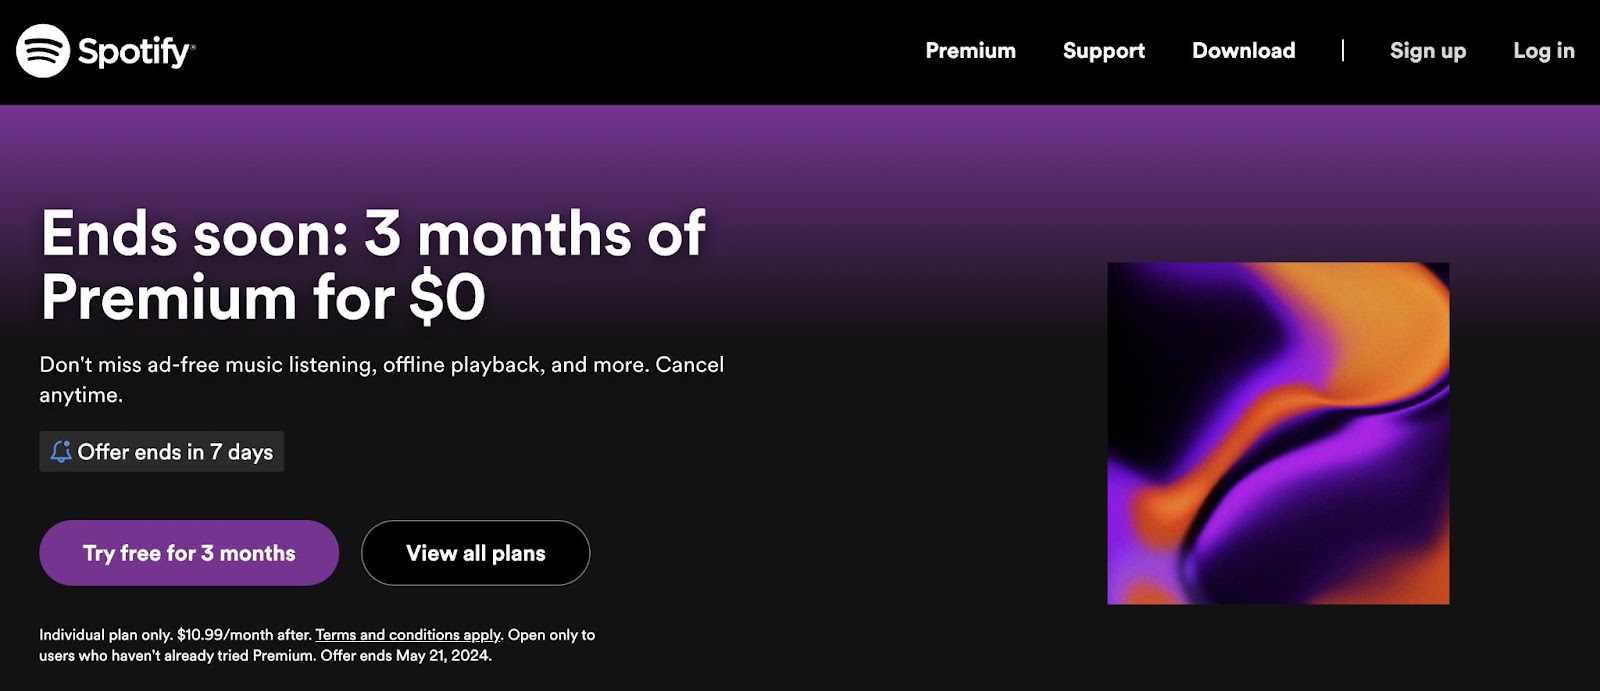 Spotify Premium landing page with 3 month $0 offer alongside abstract purple and orange swirl